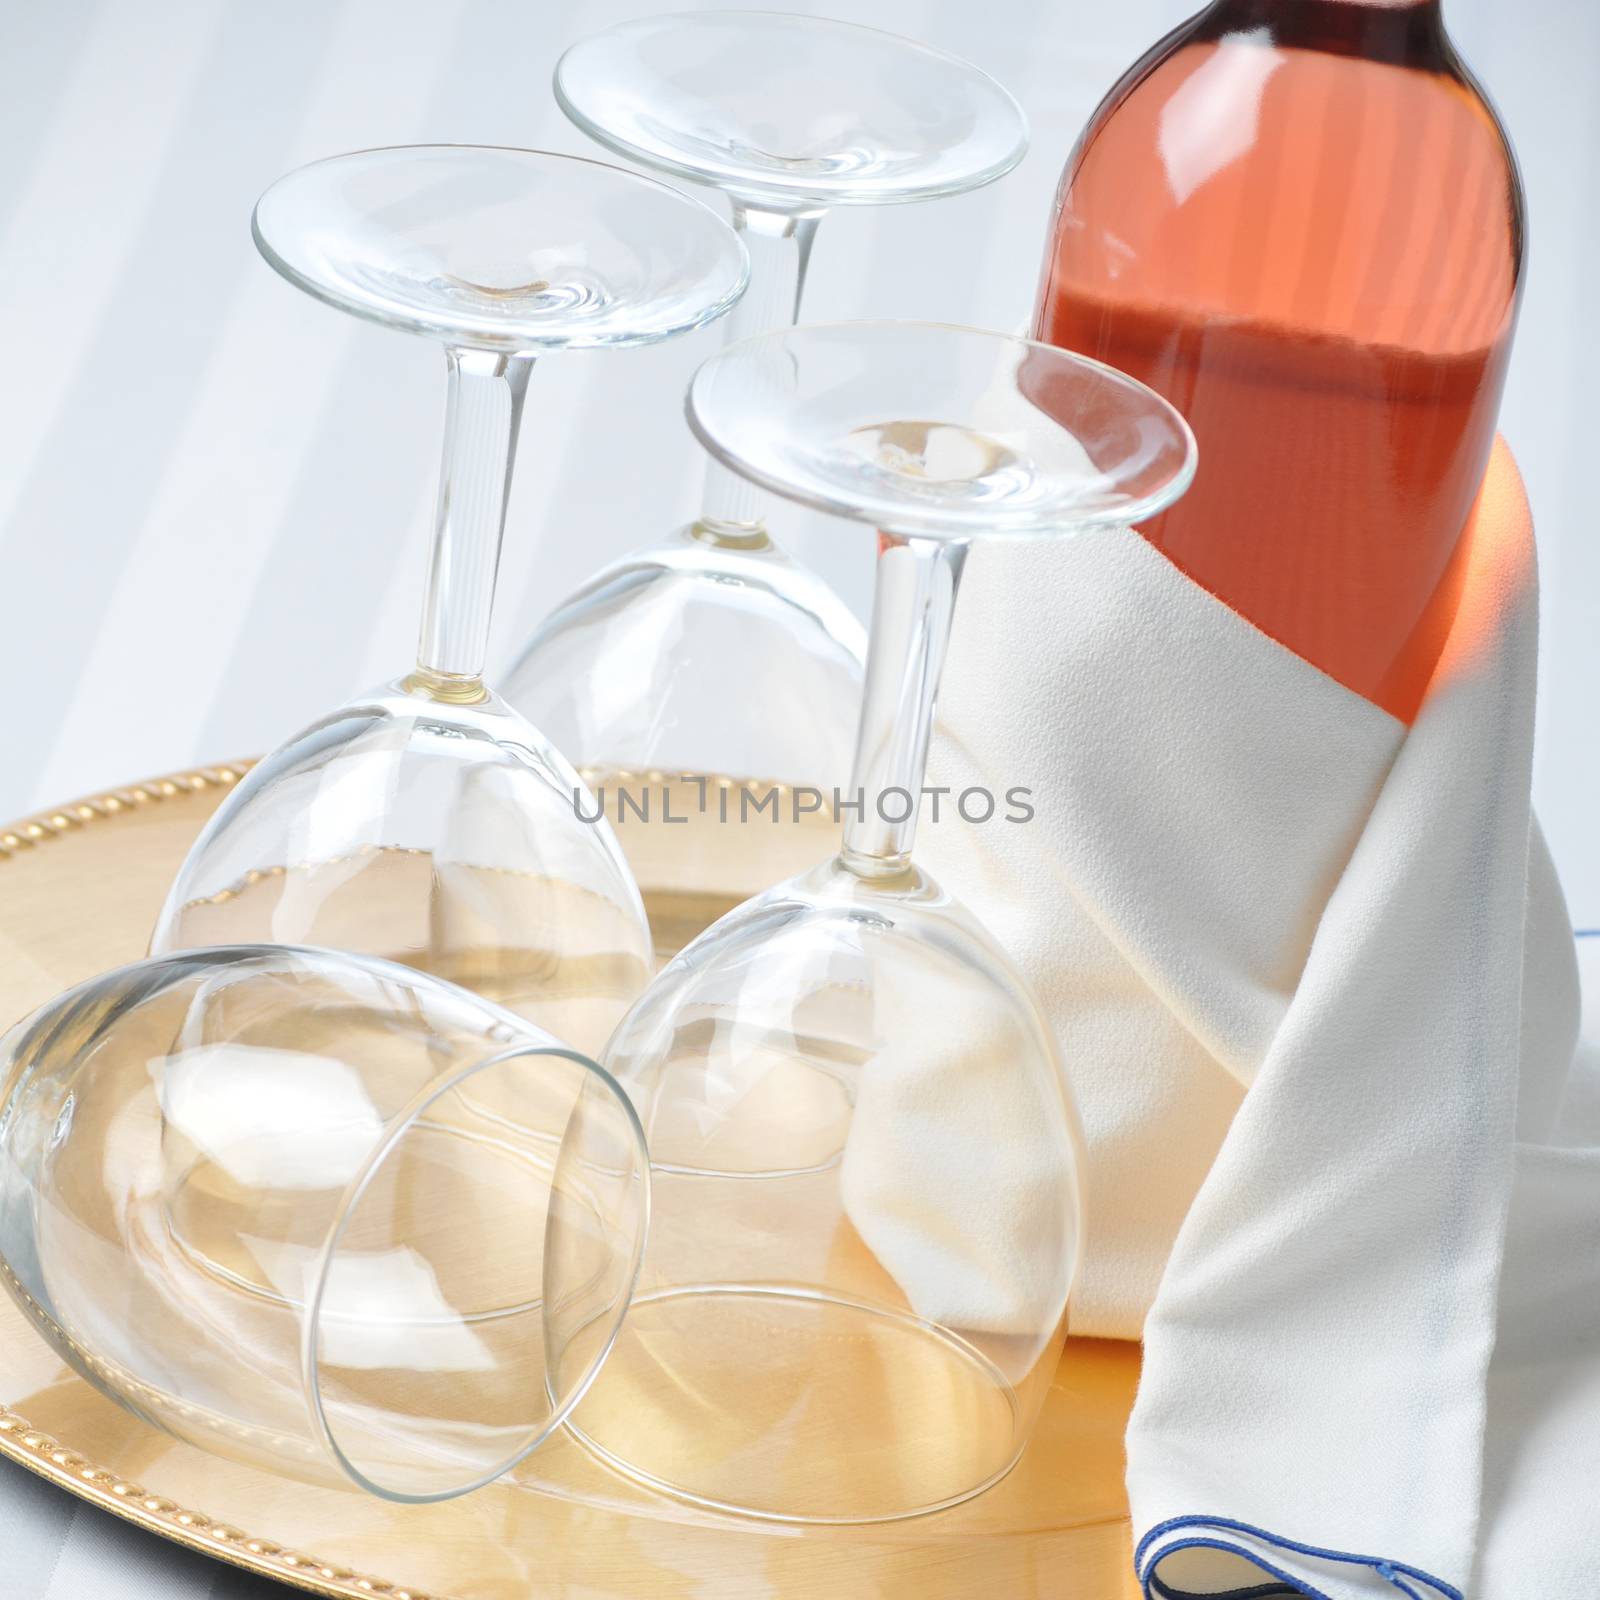 Blush Wine Bottle on Tray with Glasses by sCukrov